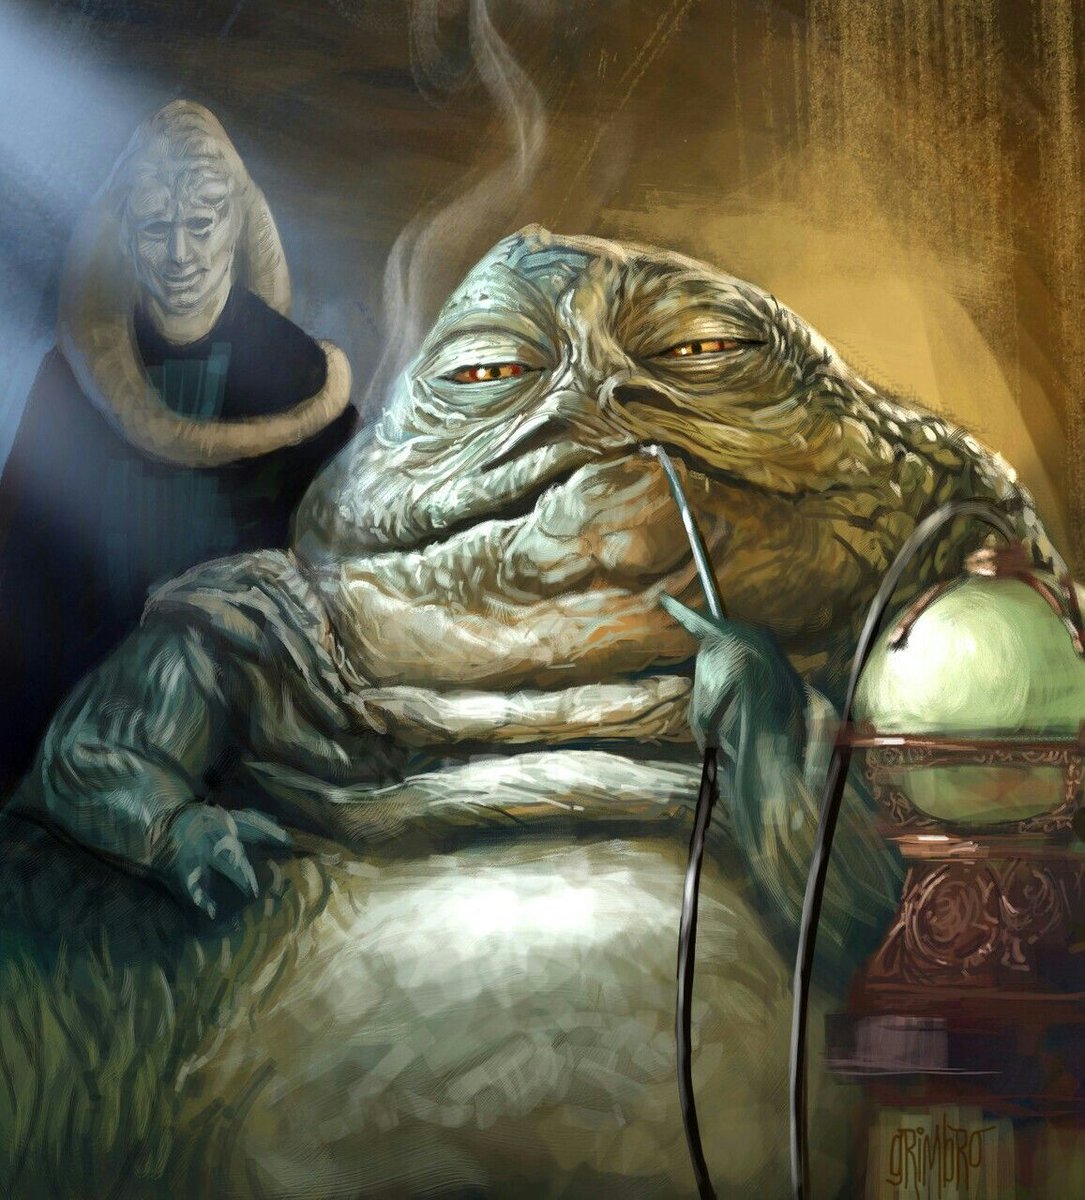 Give me Jabba please! 